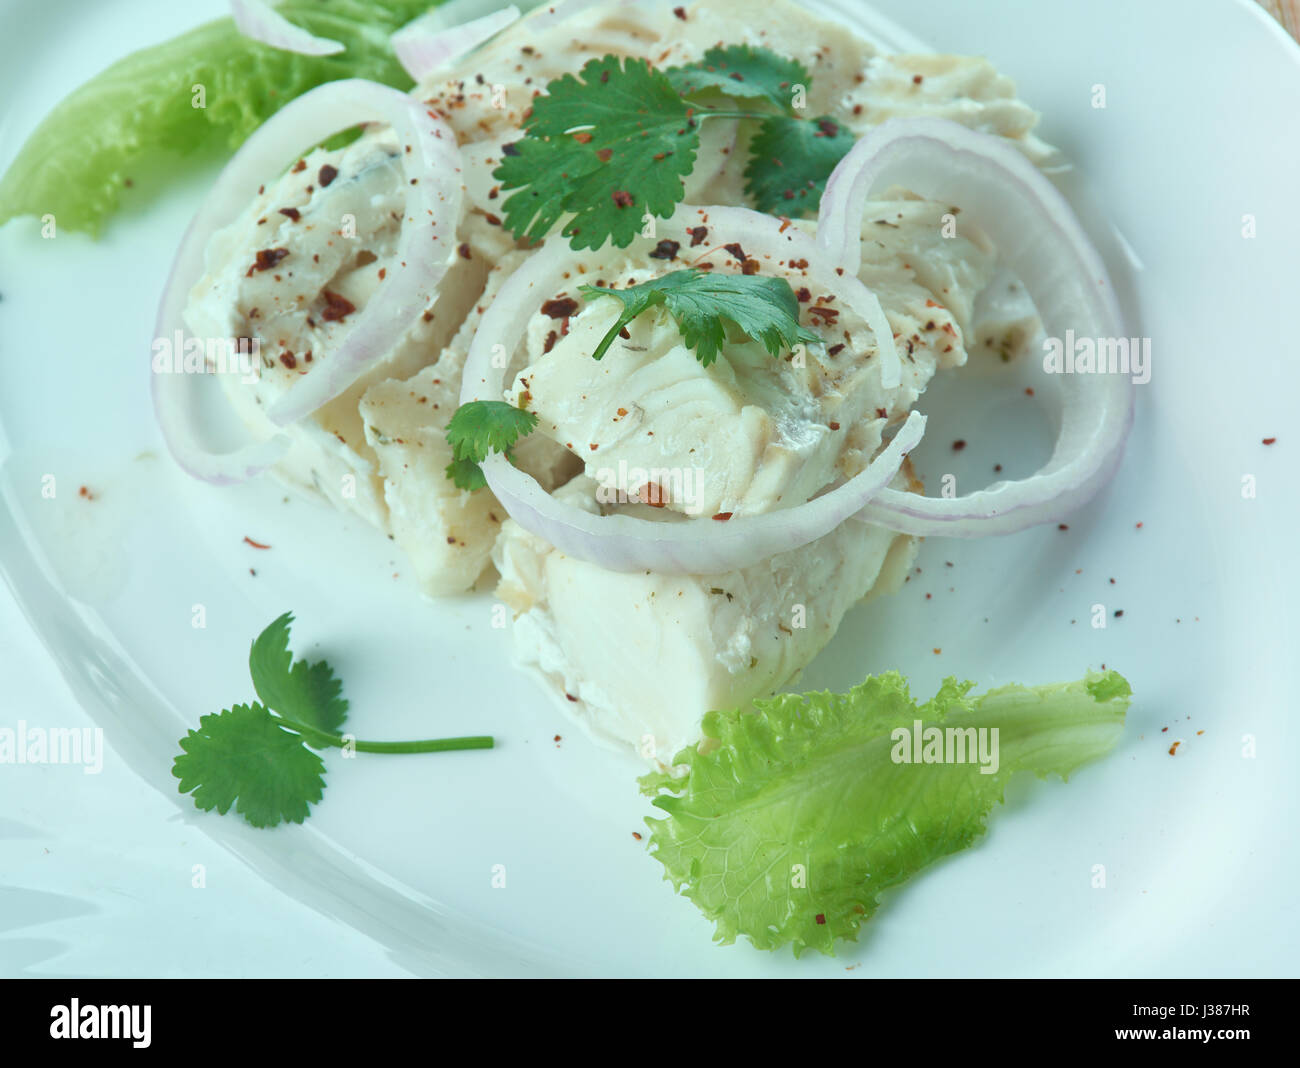 Sea bass ceviche on a White Plate. Stock Photo